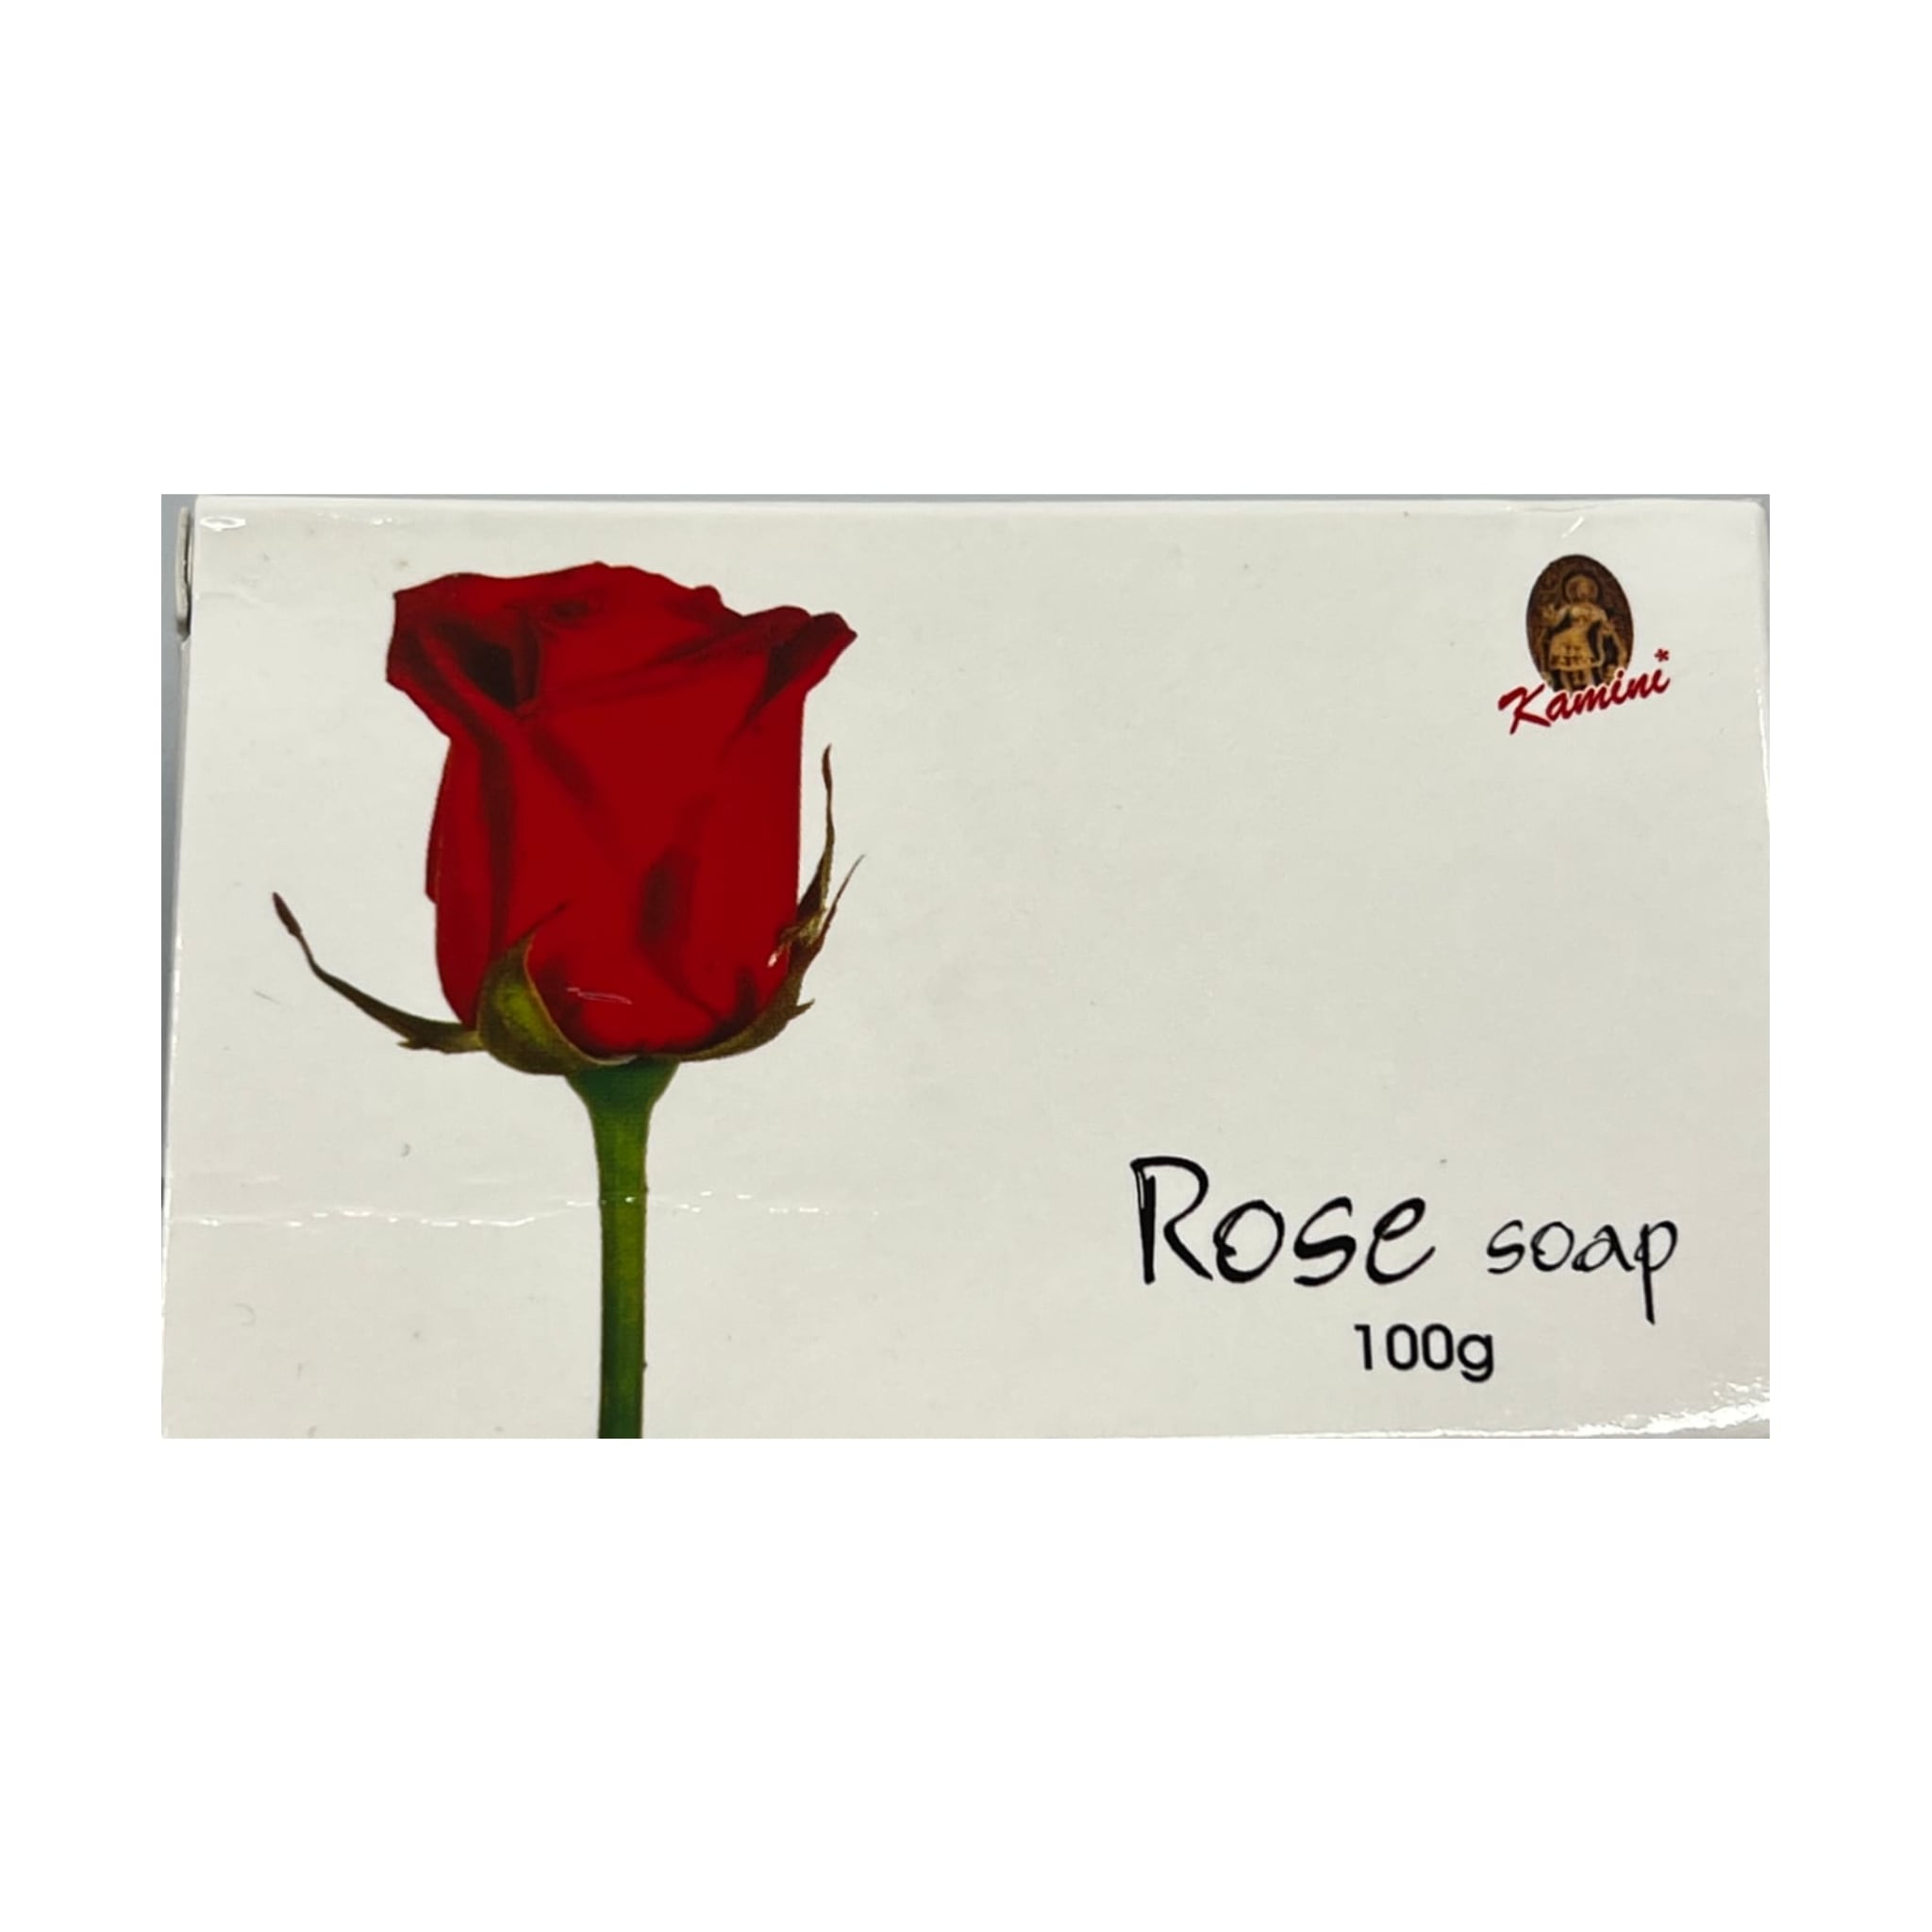 White box with image of red rose rose soap 